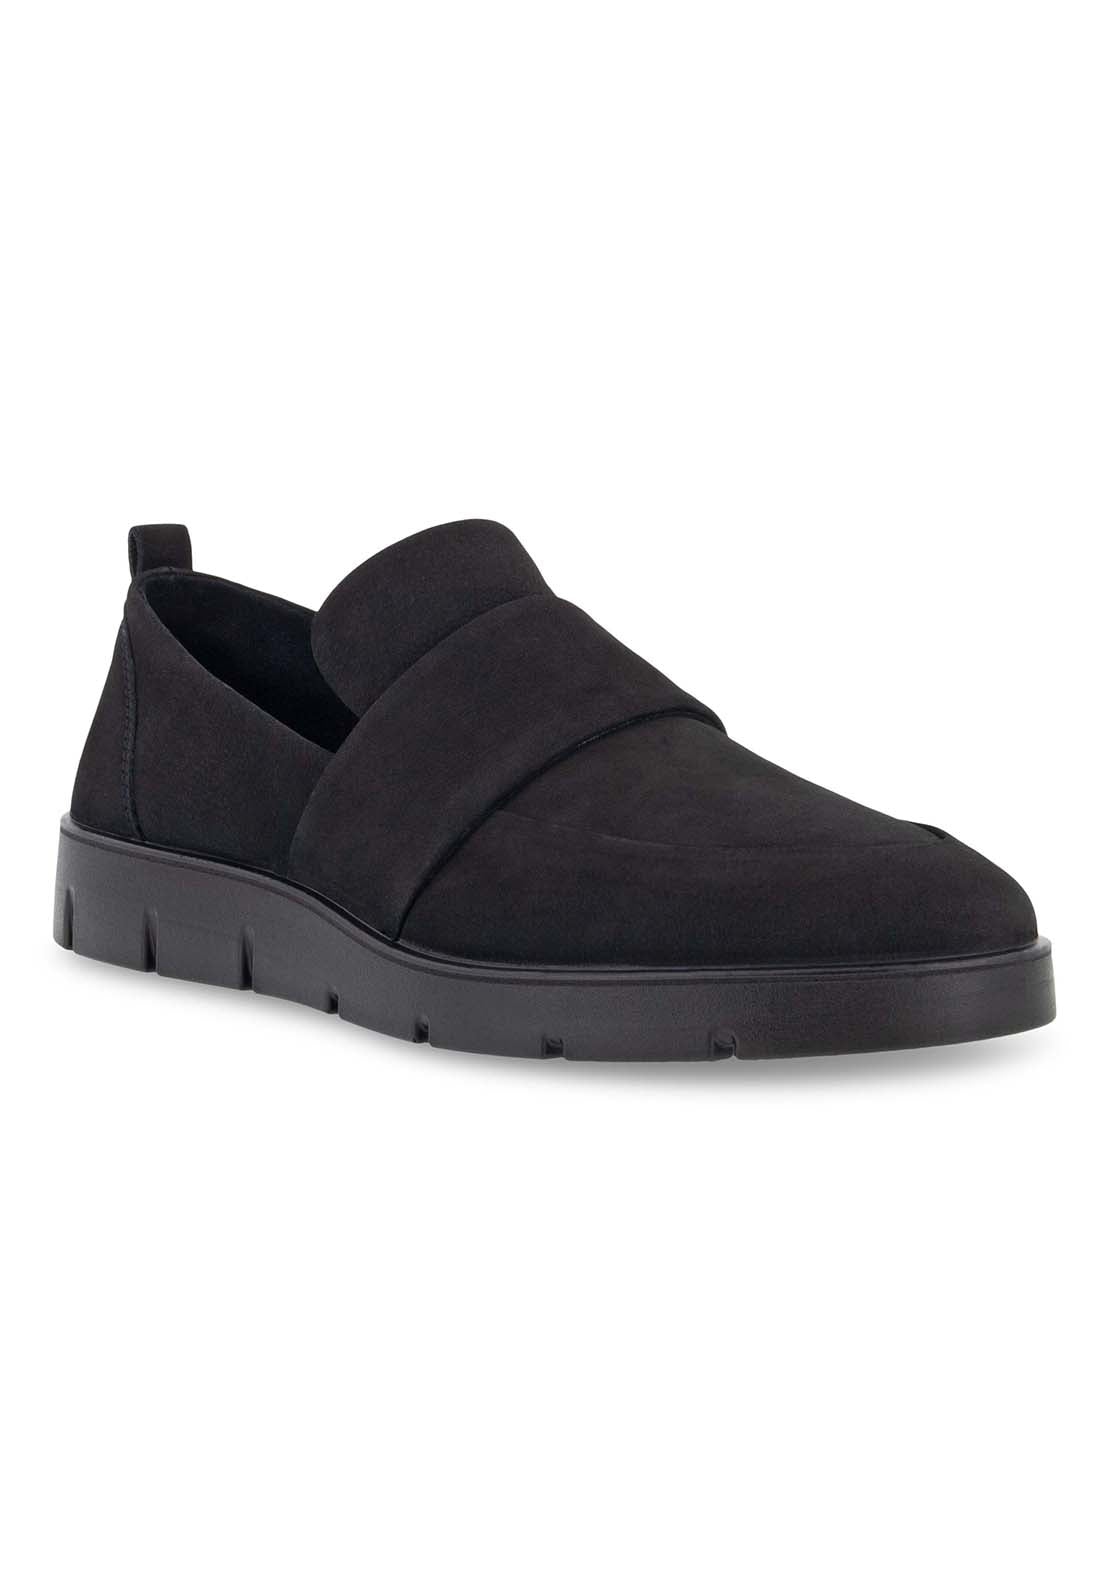 Ecco Bella Casual Slip on Shoe 1 Shaws Department Stores